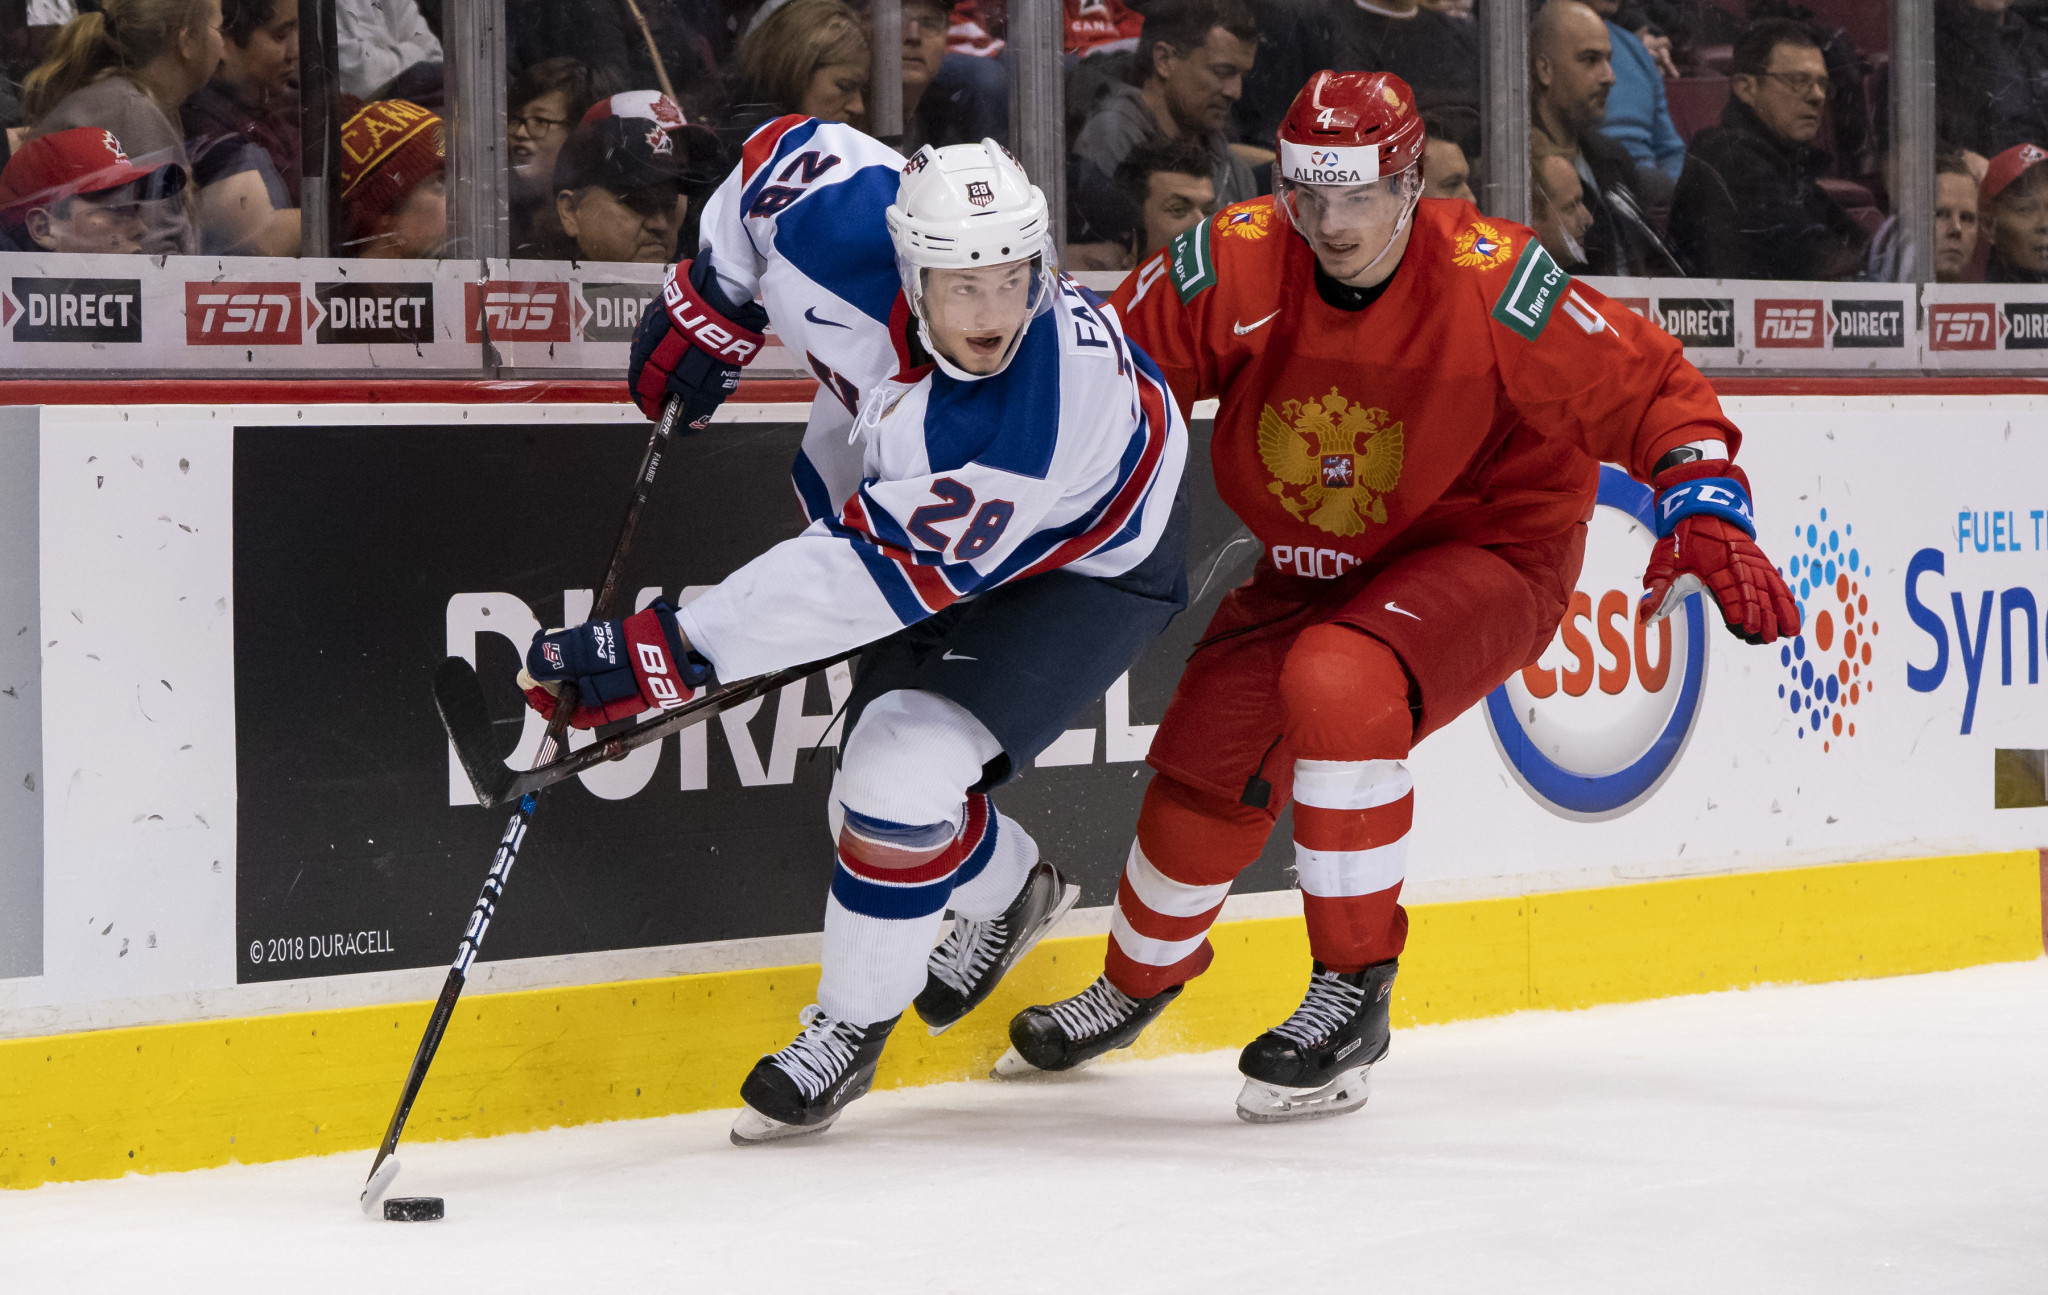 The 2021 International Ice Hockey Federation World Junior Championship is still scheduled to take place in Canada and start in late December this year ©Getty Images